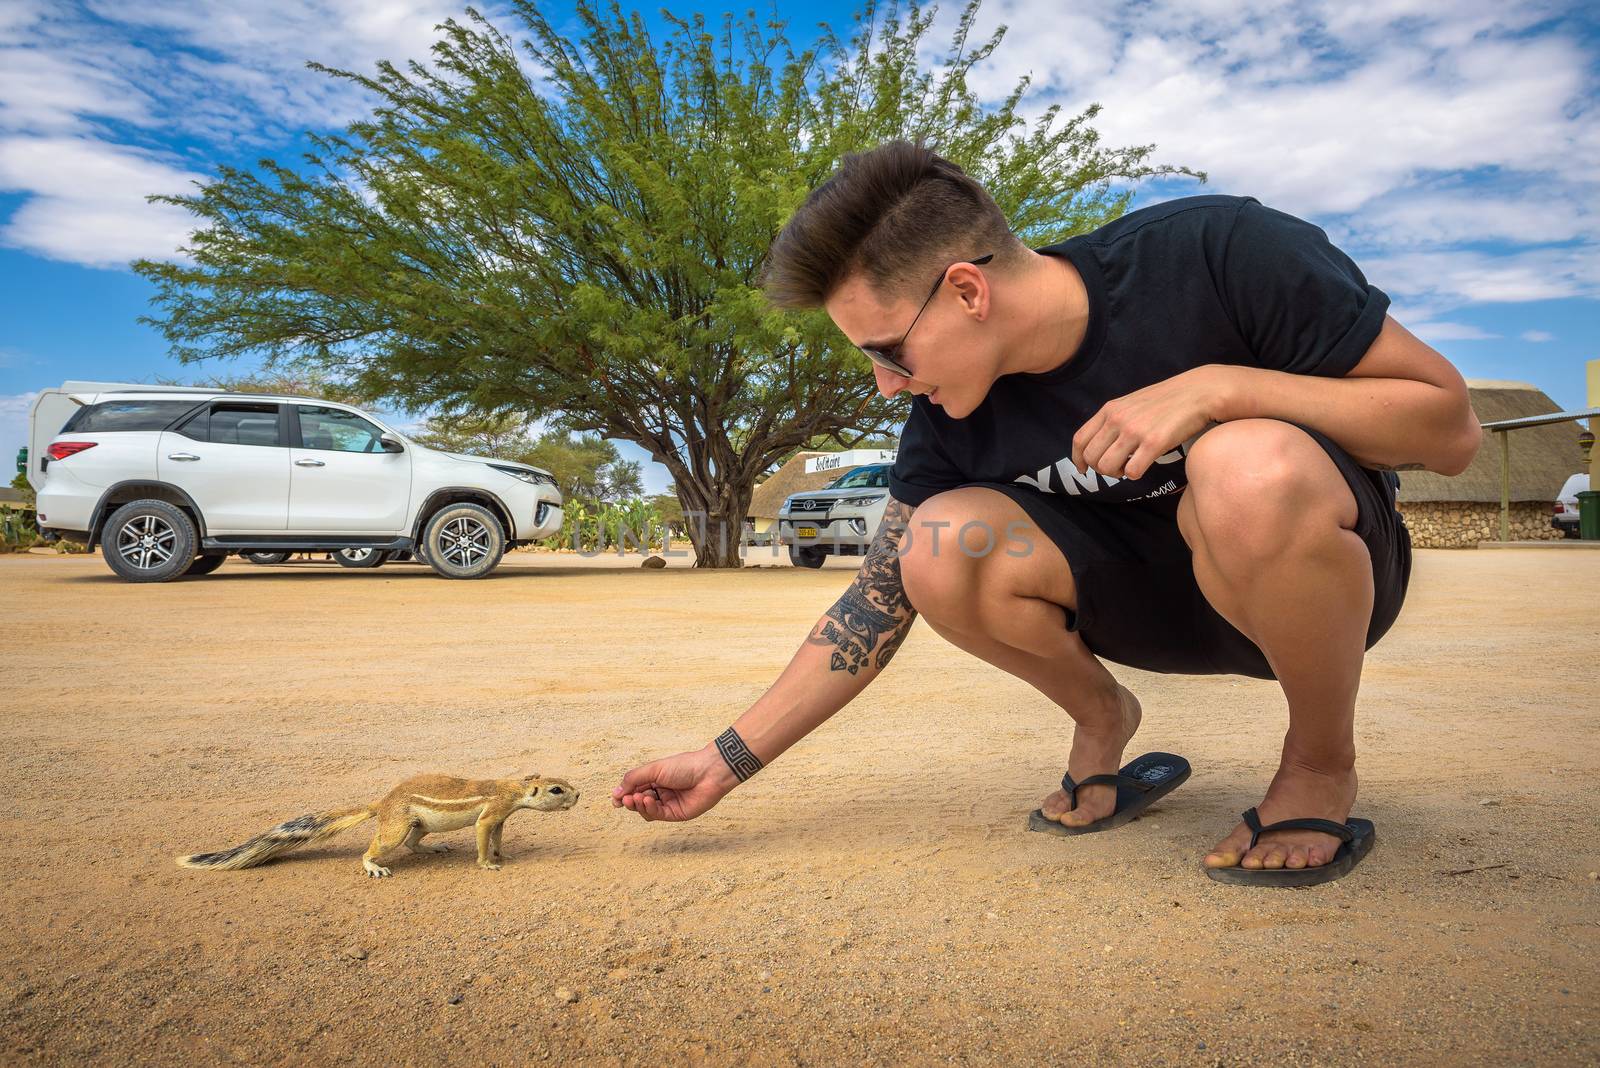 Tourist feeding a squirrel in Solitaire, Namibia by nickfox